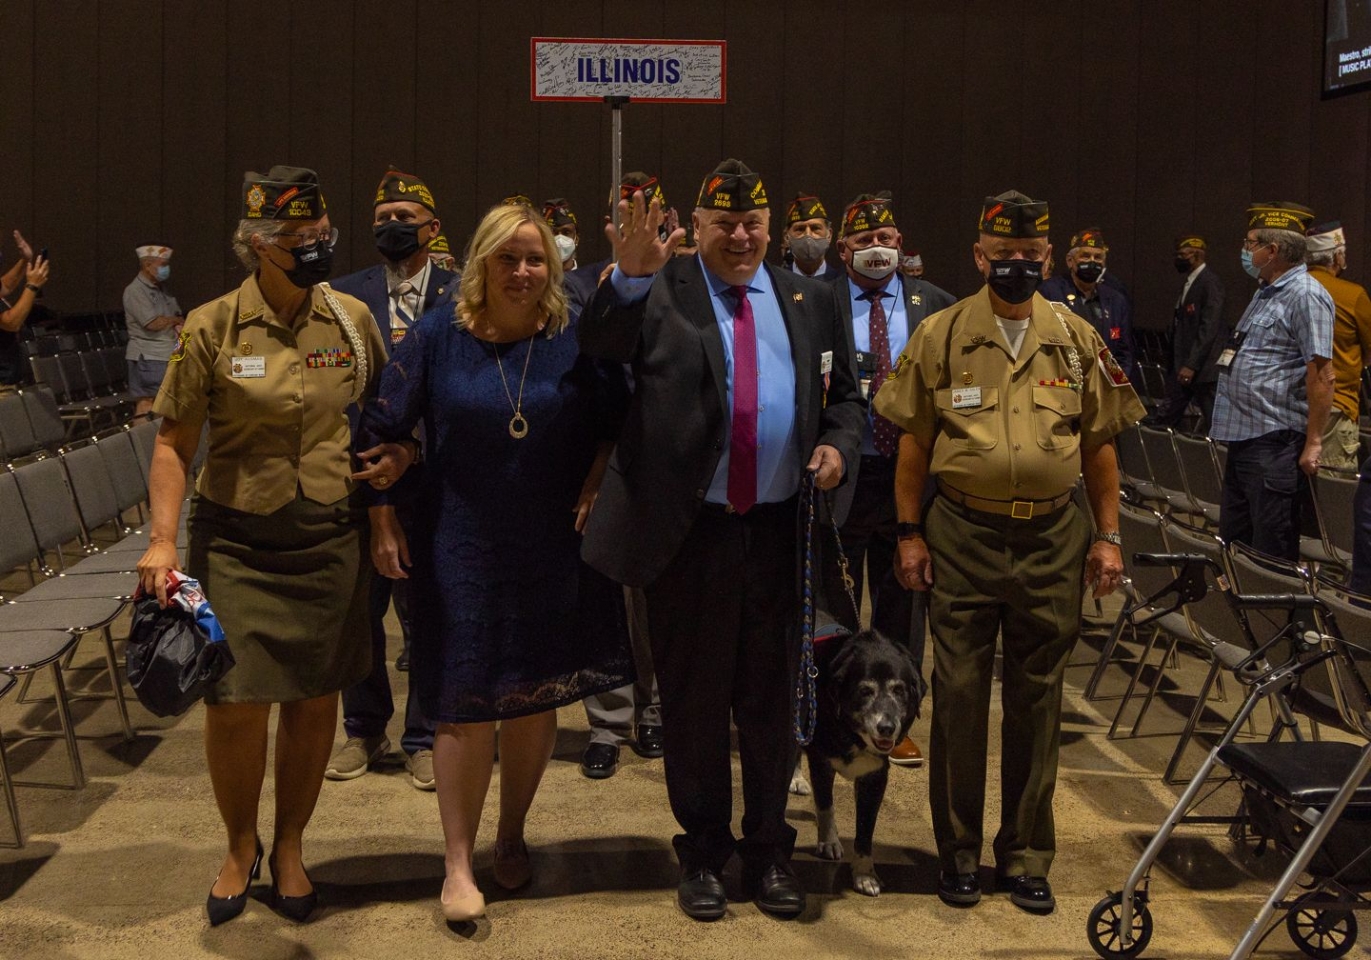 Veterans of Foreign Wars National Convention 30 July 3 August 2021 Kansas City Missouri. The celebration begins with the Illinois delegation in the lead